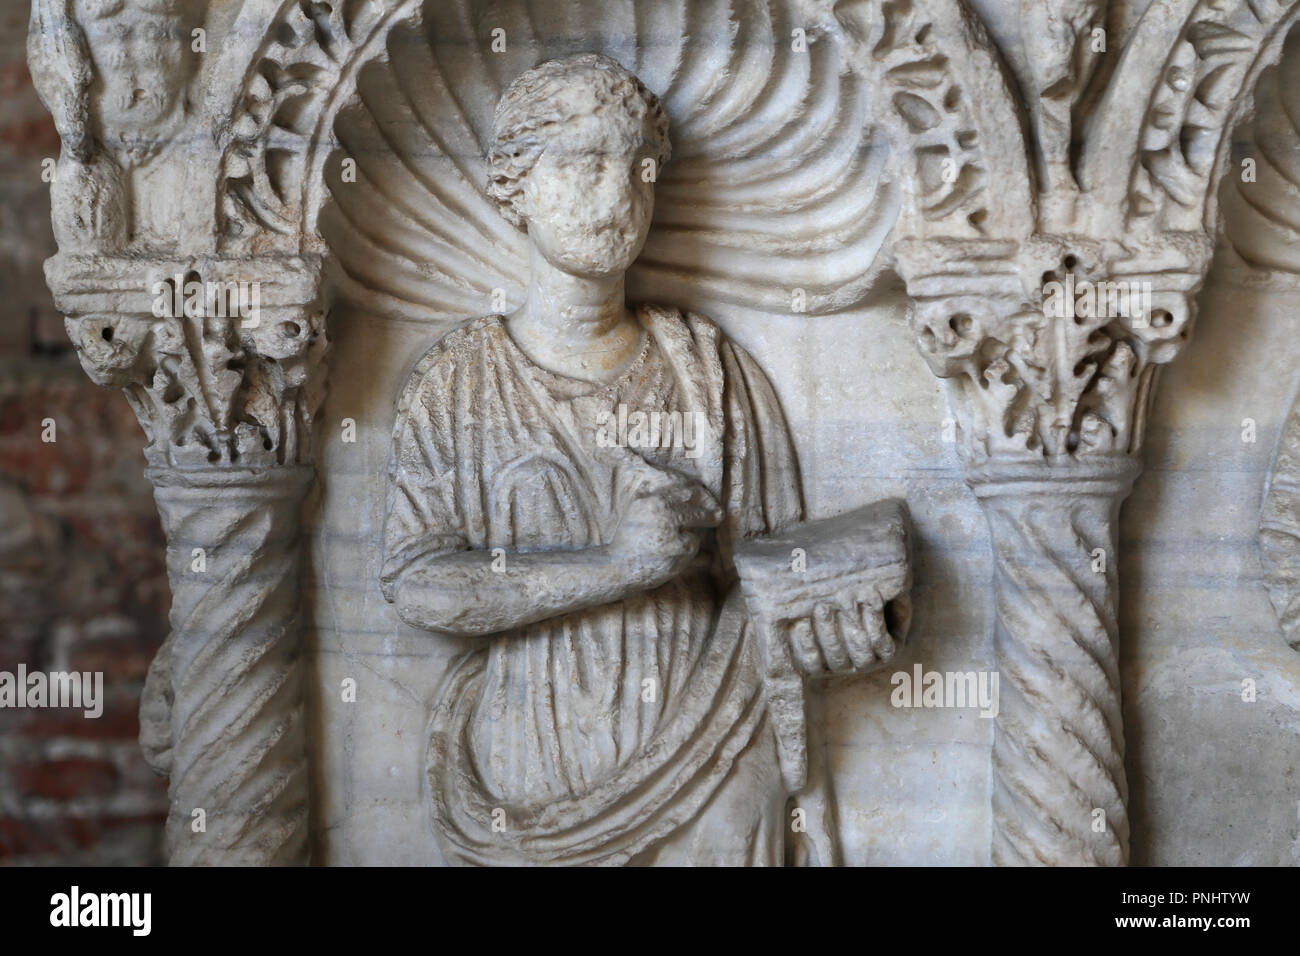 Italy. Pisa. Campo Santo. Roman sarcophagus. Calliope writing tablet. Muse of epic poetry. 3rd century. Tuscany region. Stock Photo